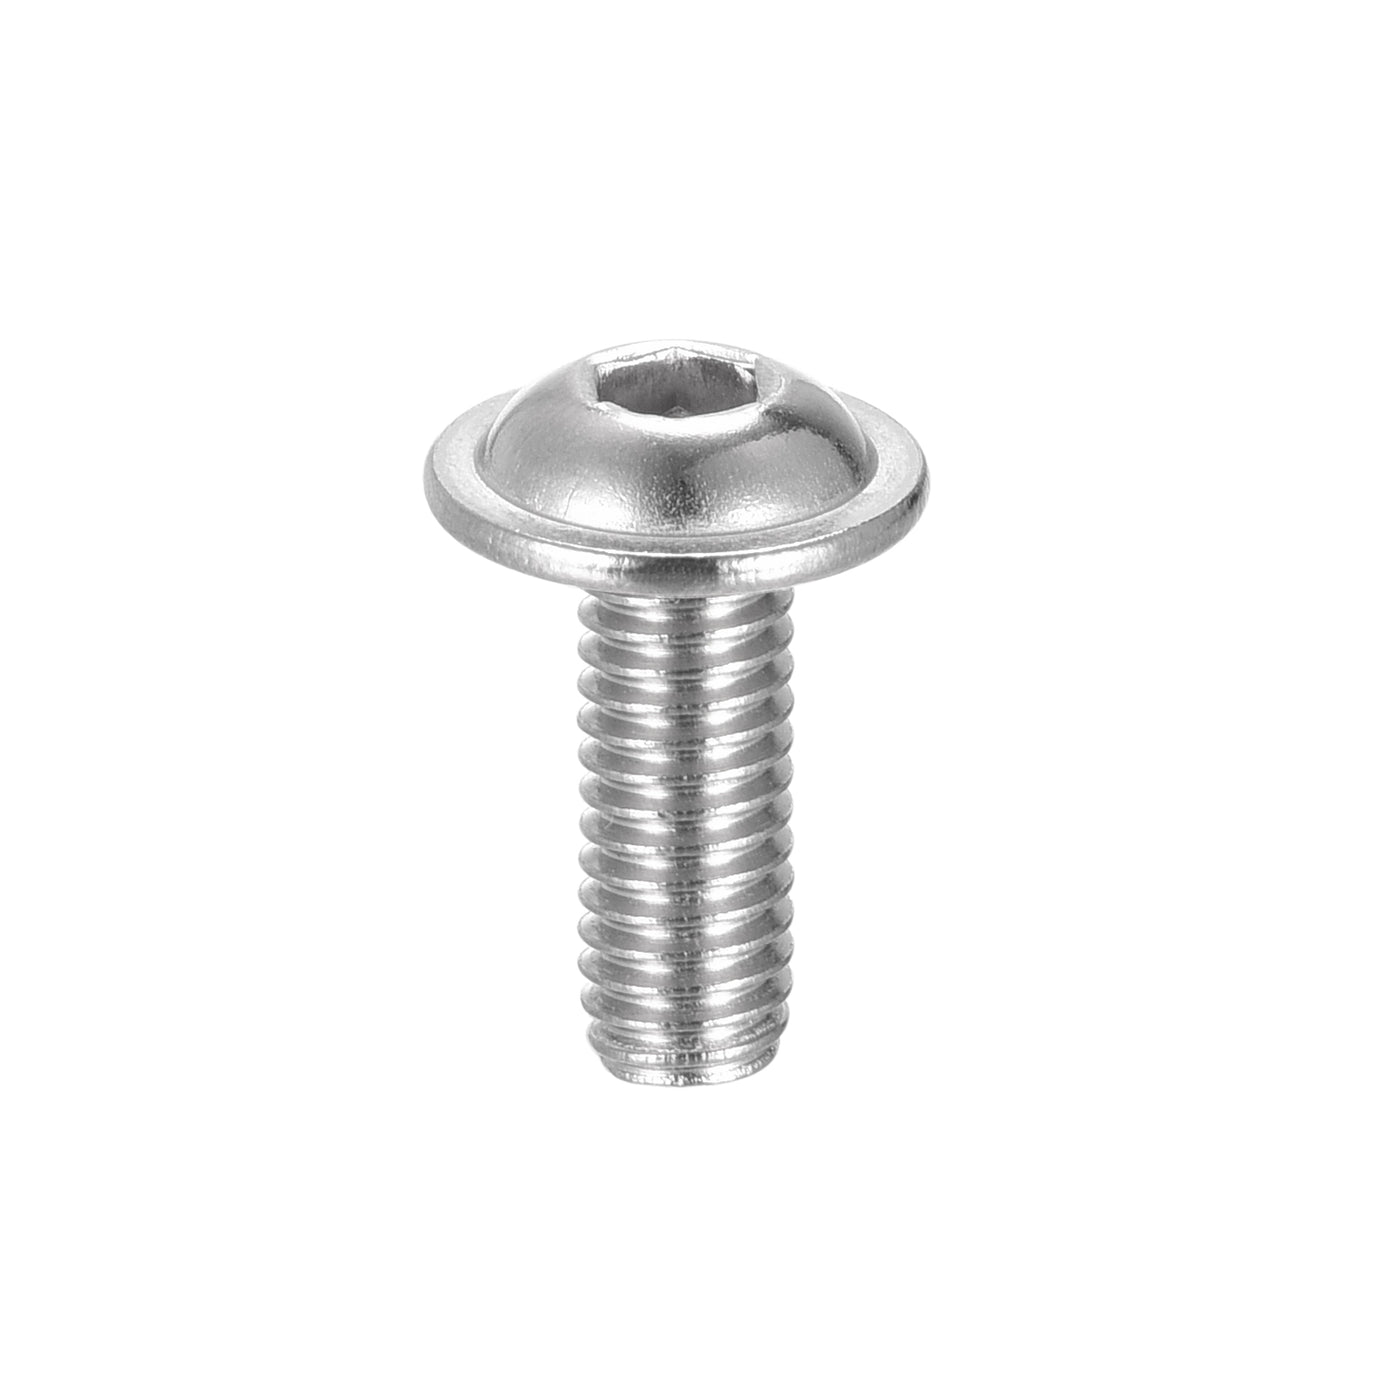 Uxcell Uxcell M6x14mm 304 Stainless Steel Flanged Button Head Socket Cap Screws 20pcs